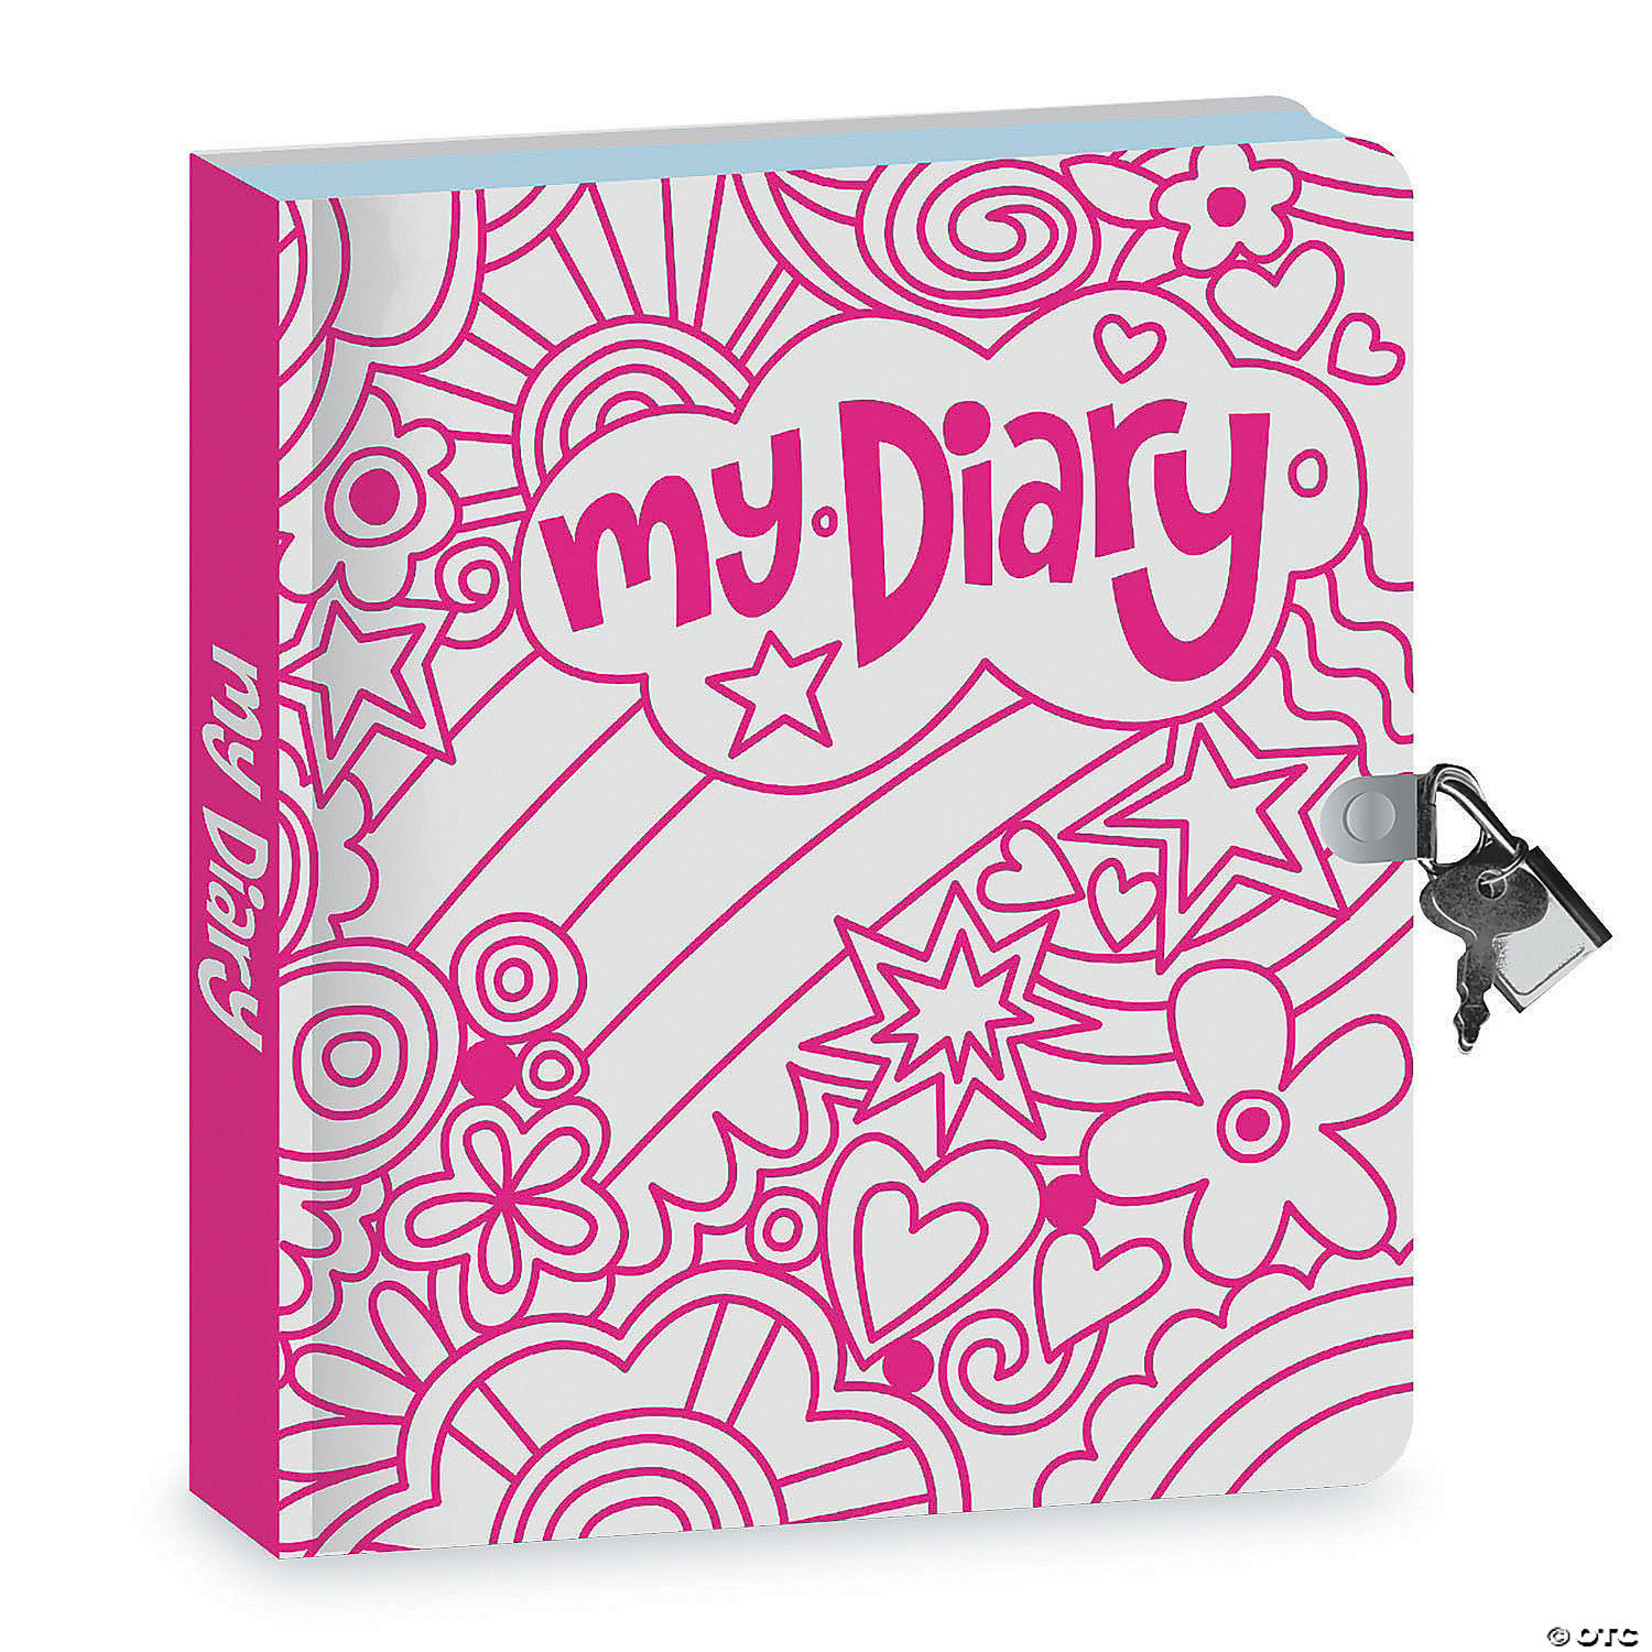 Mindware Rainbow World Foil Coloring Diary